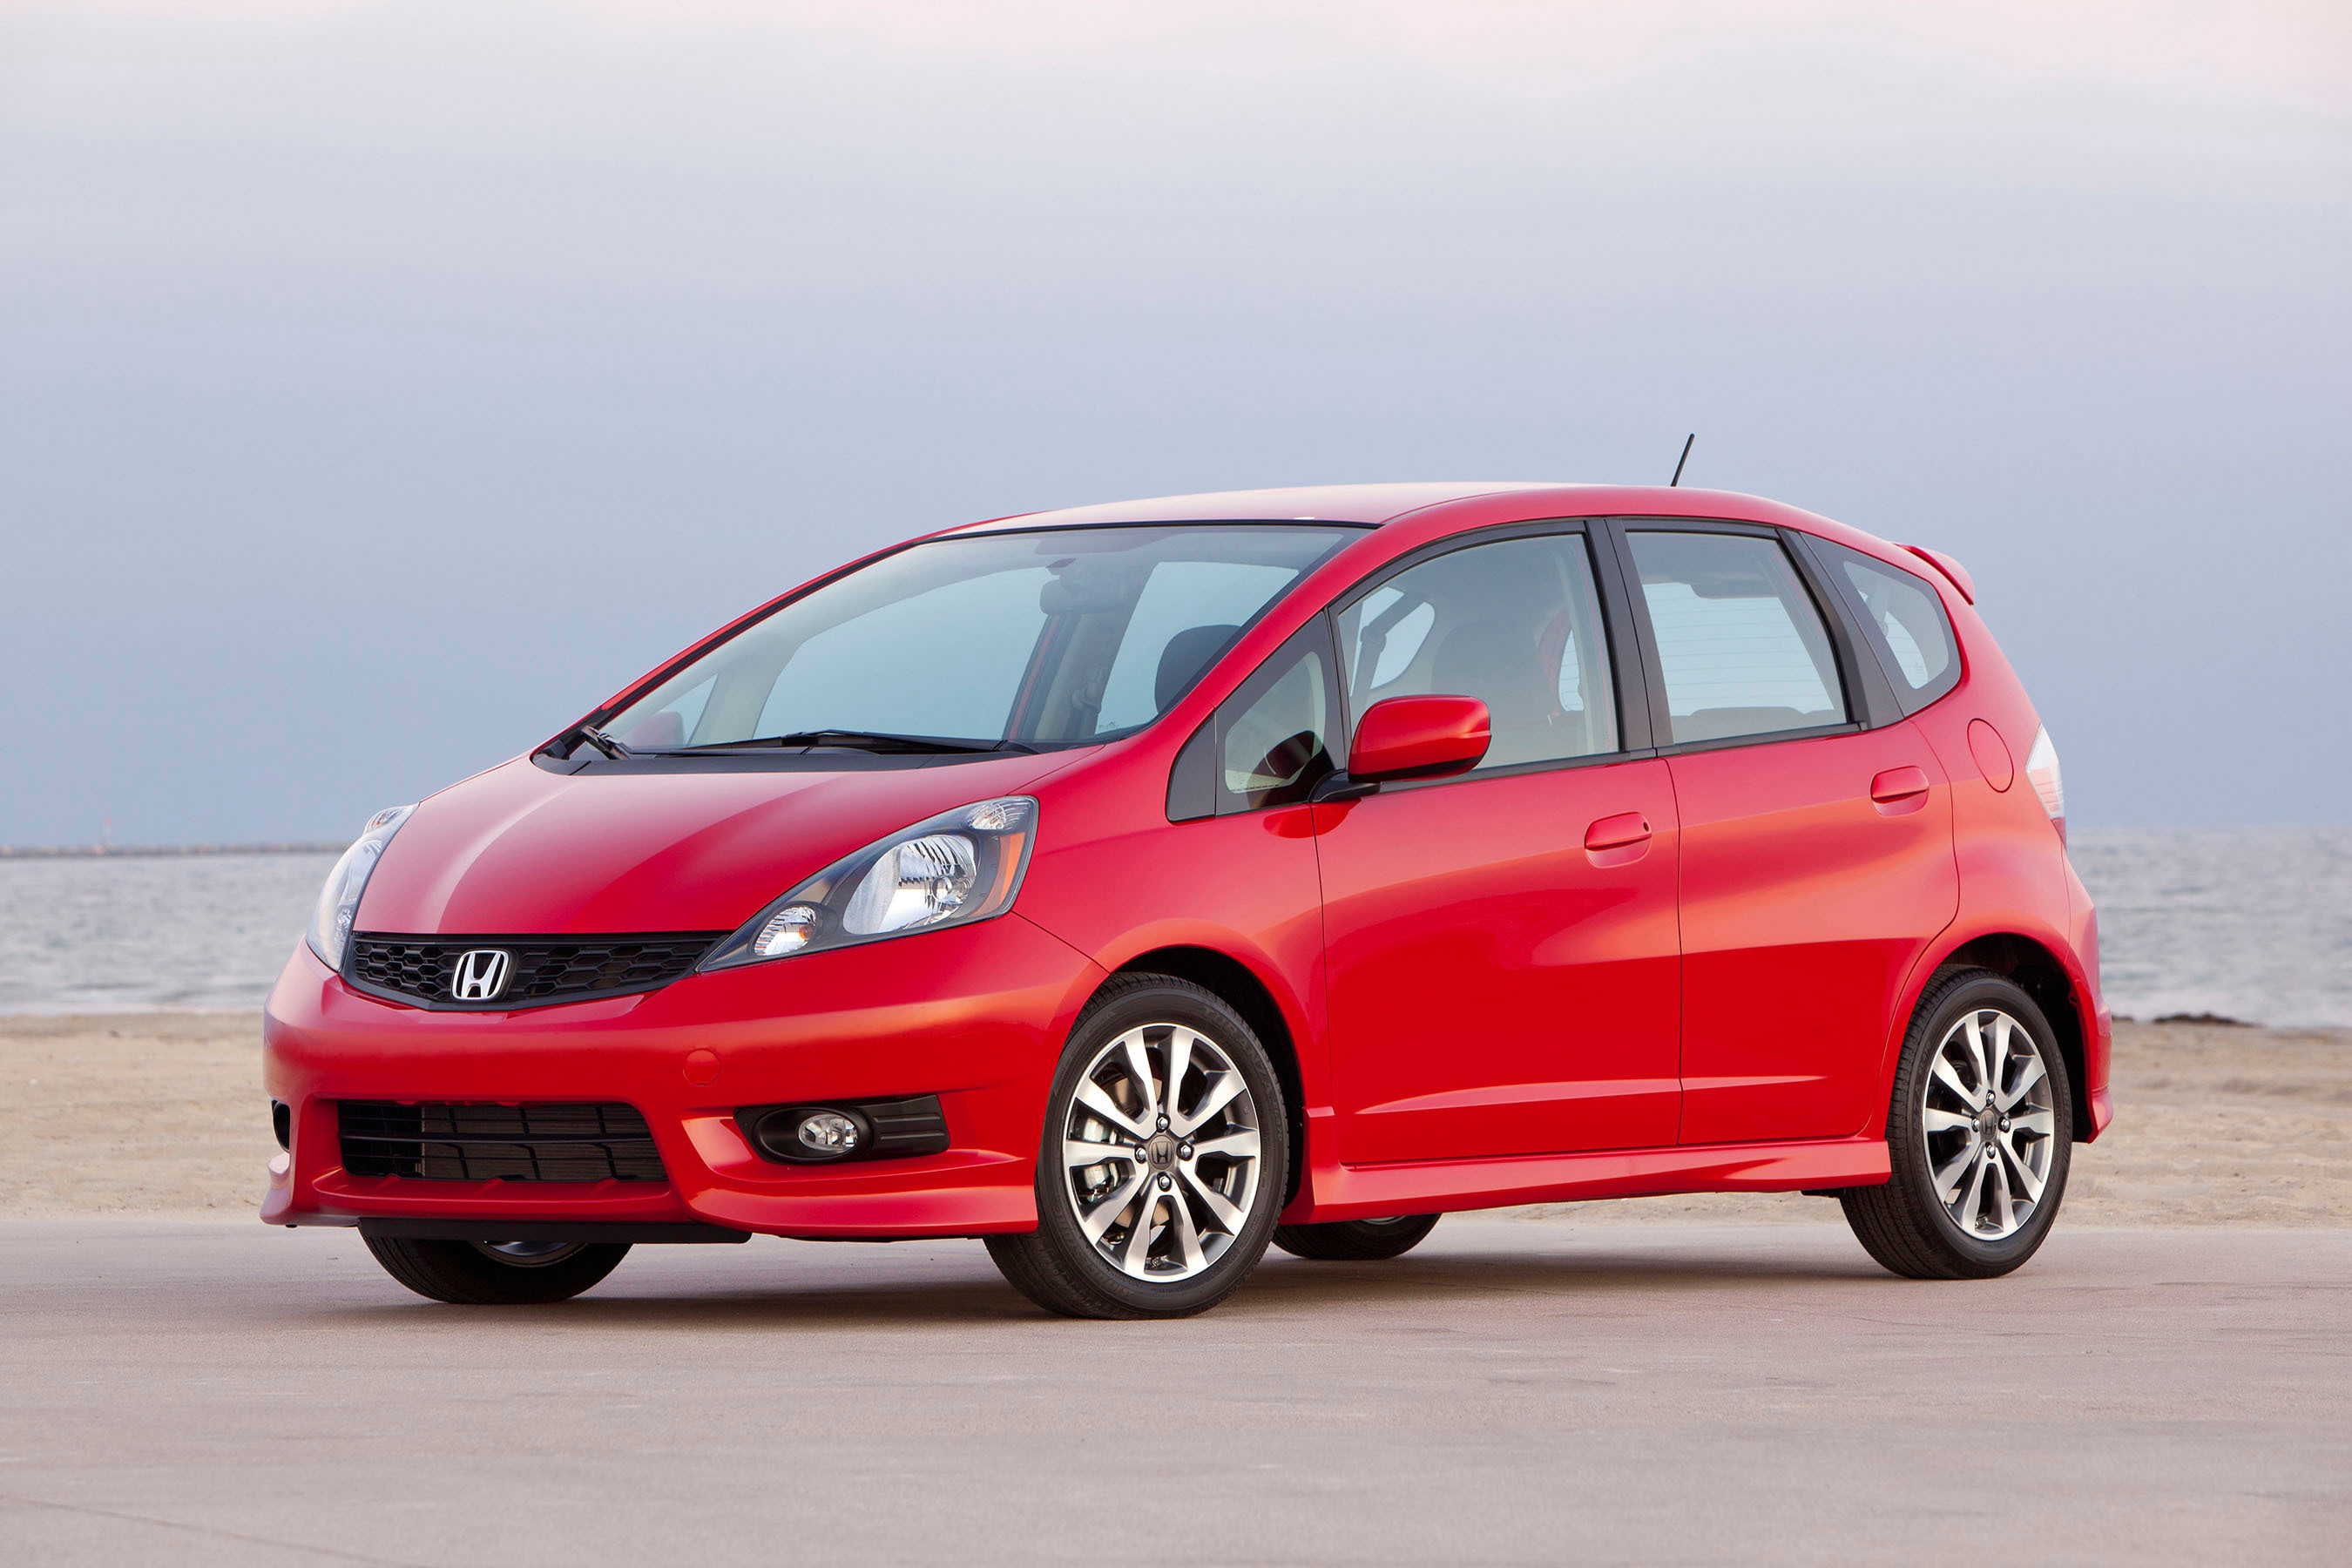 2013 Honda Fit Delivers Unmatched Combination of Versatility, Efficiency  and Fun